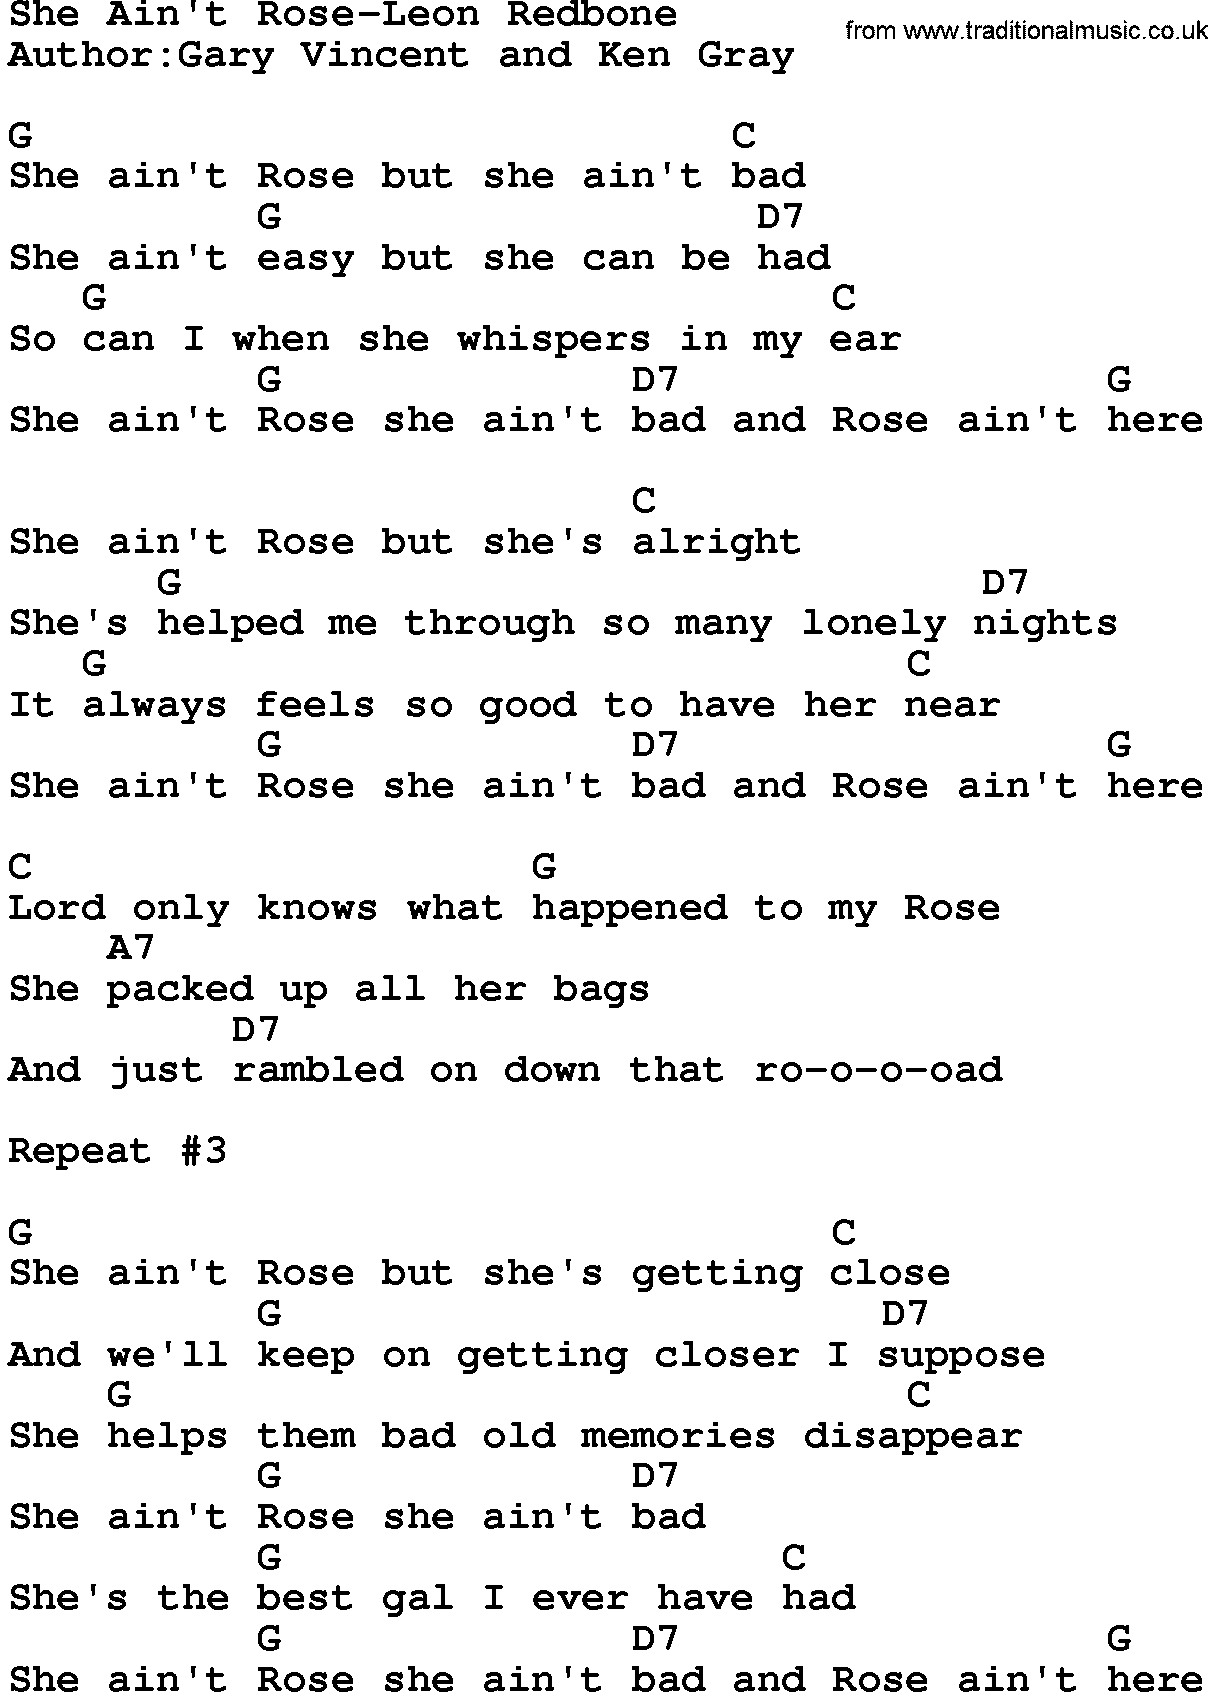 Country music song: She Ain't Rose-Leon Redbone lyrics and chords